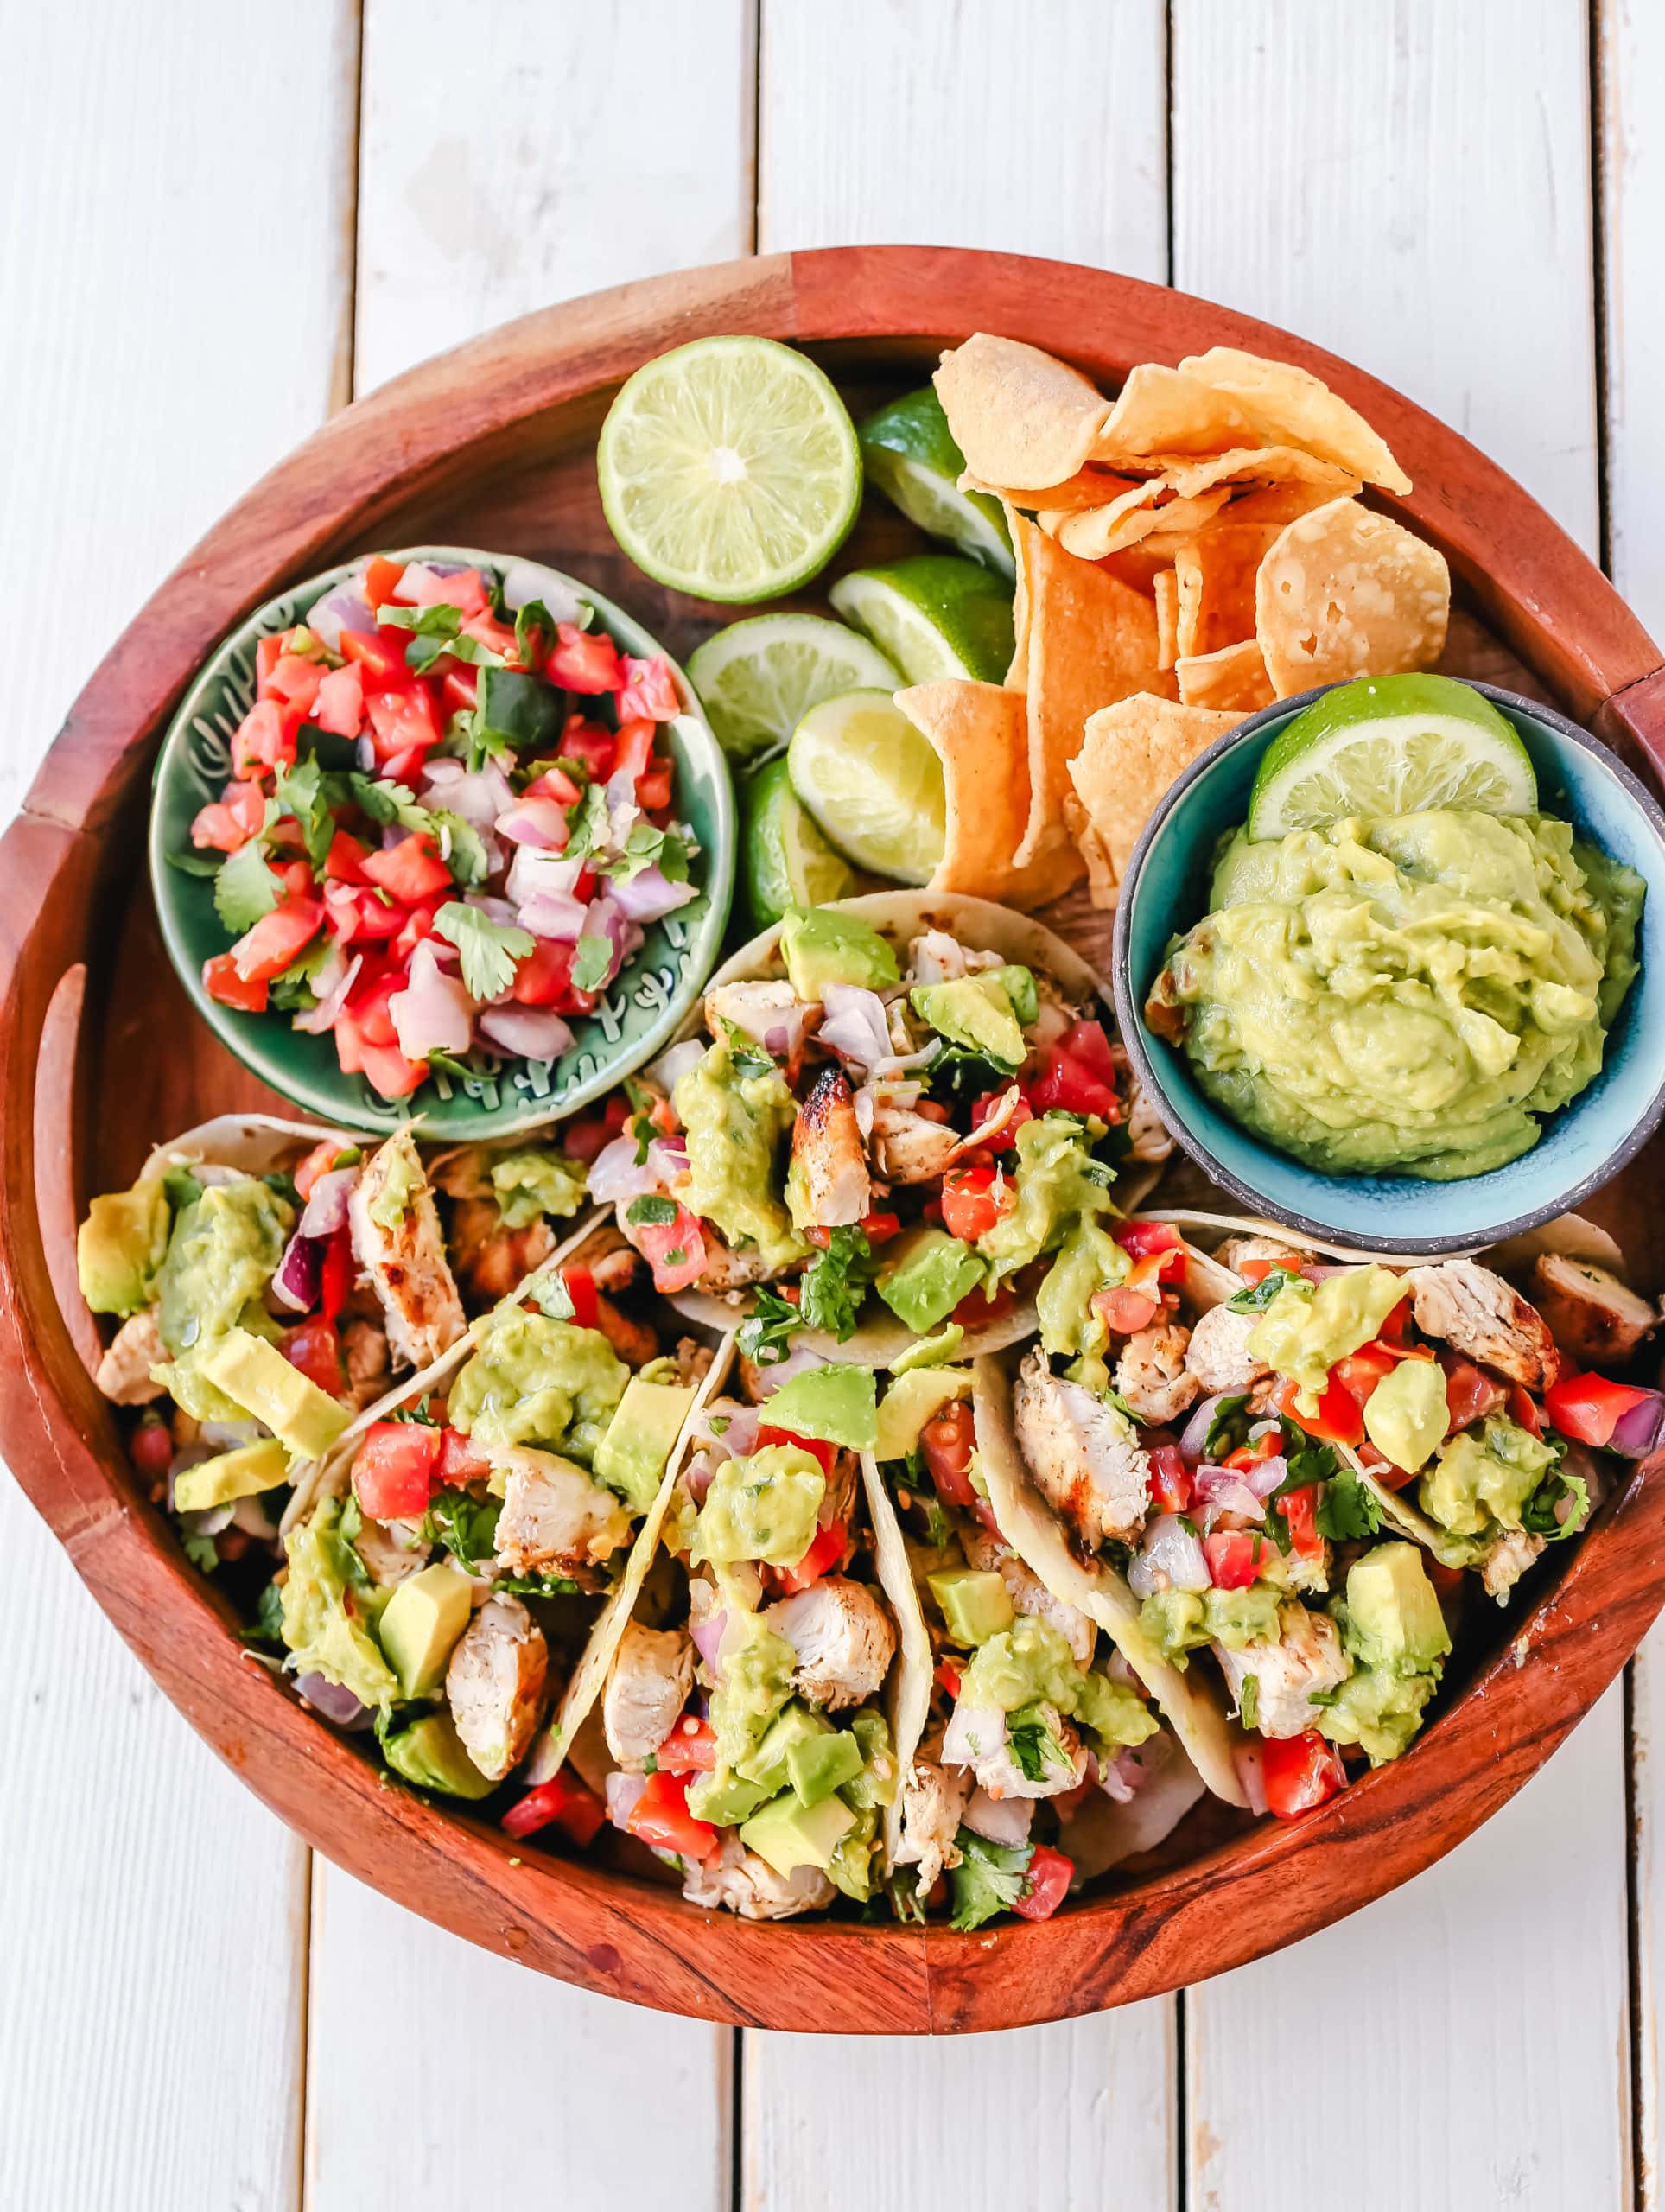 Grilled Chicken Tacos with Guacamole. Marinated grilled chicken with fresh lime and Mexican spices topped with pico de gallo and fresh guacamole. The best grilled chicken tacos! www.modernhoney.com #tacos #tacotuesday #chickentacos